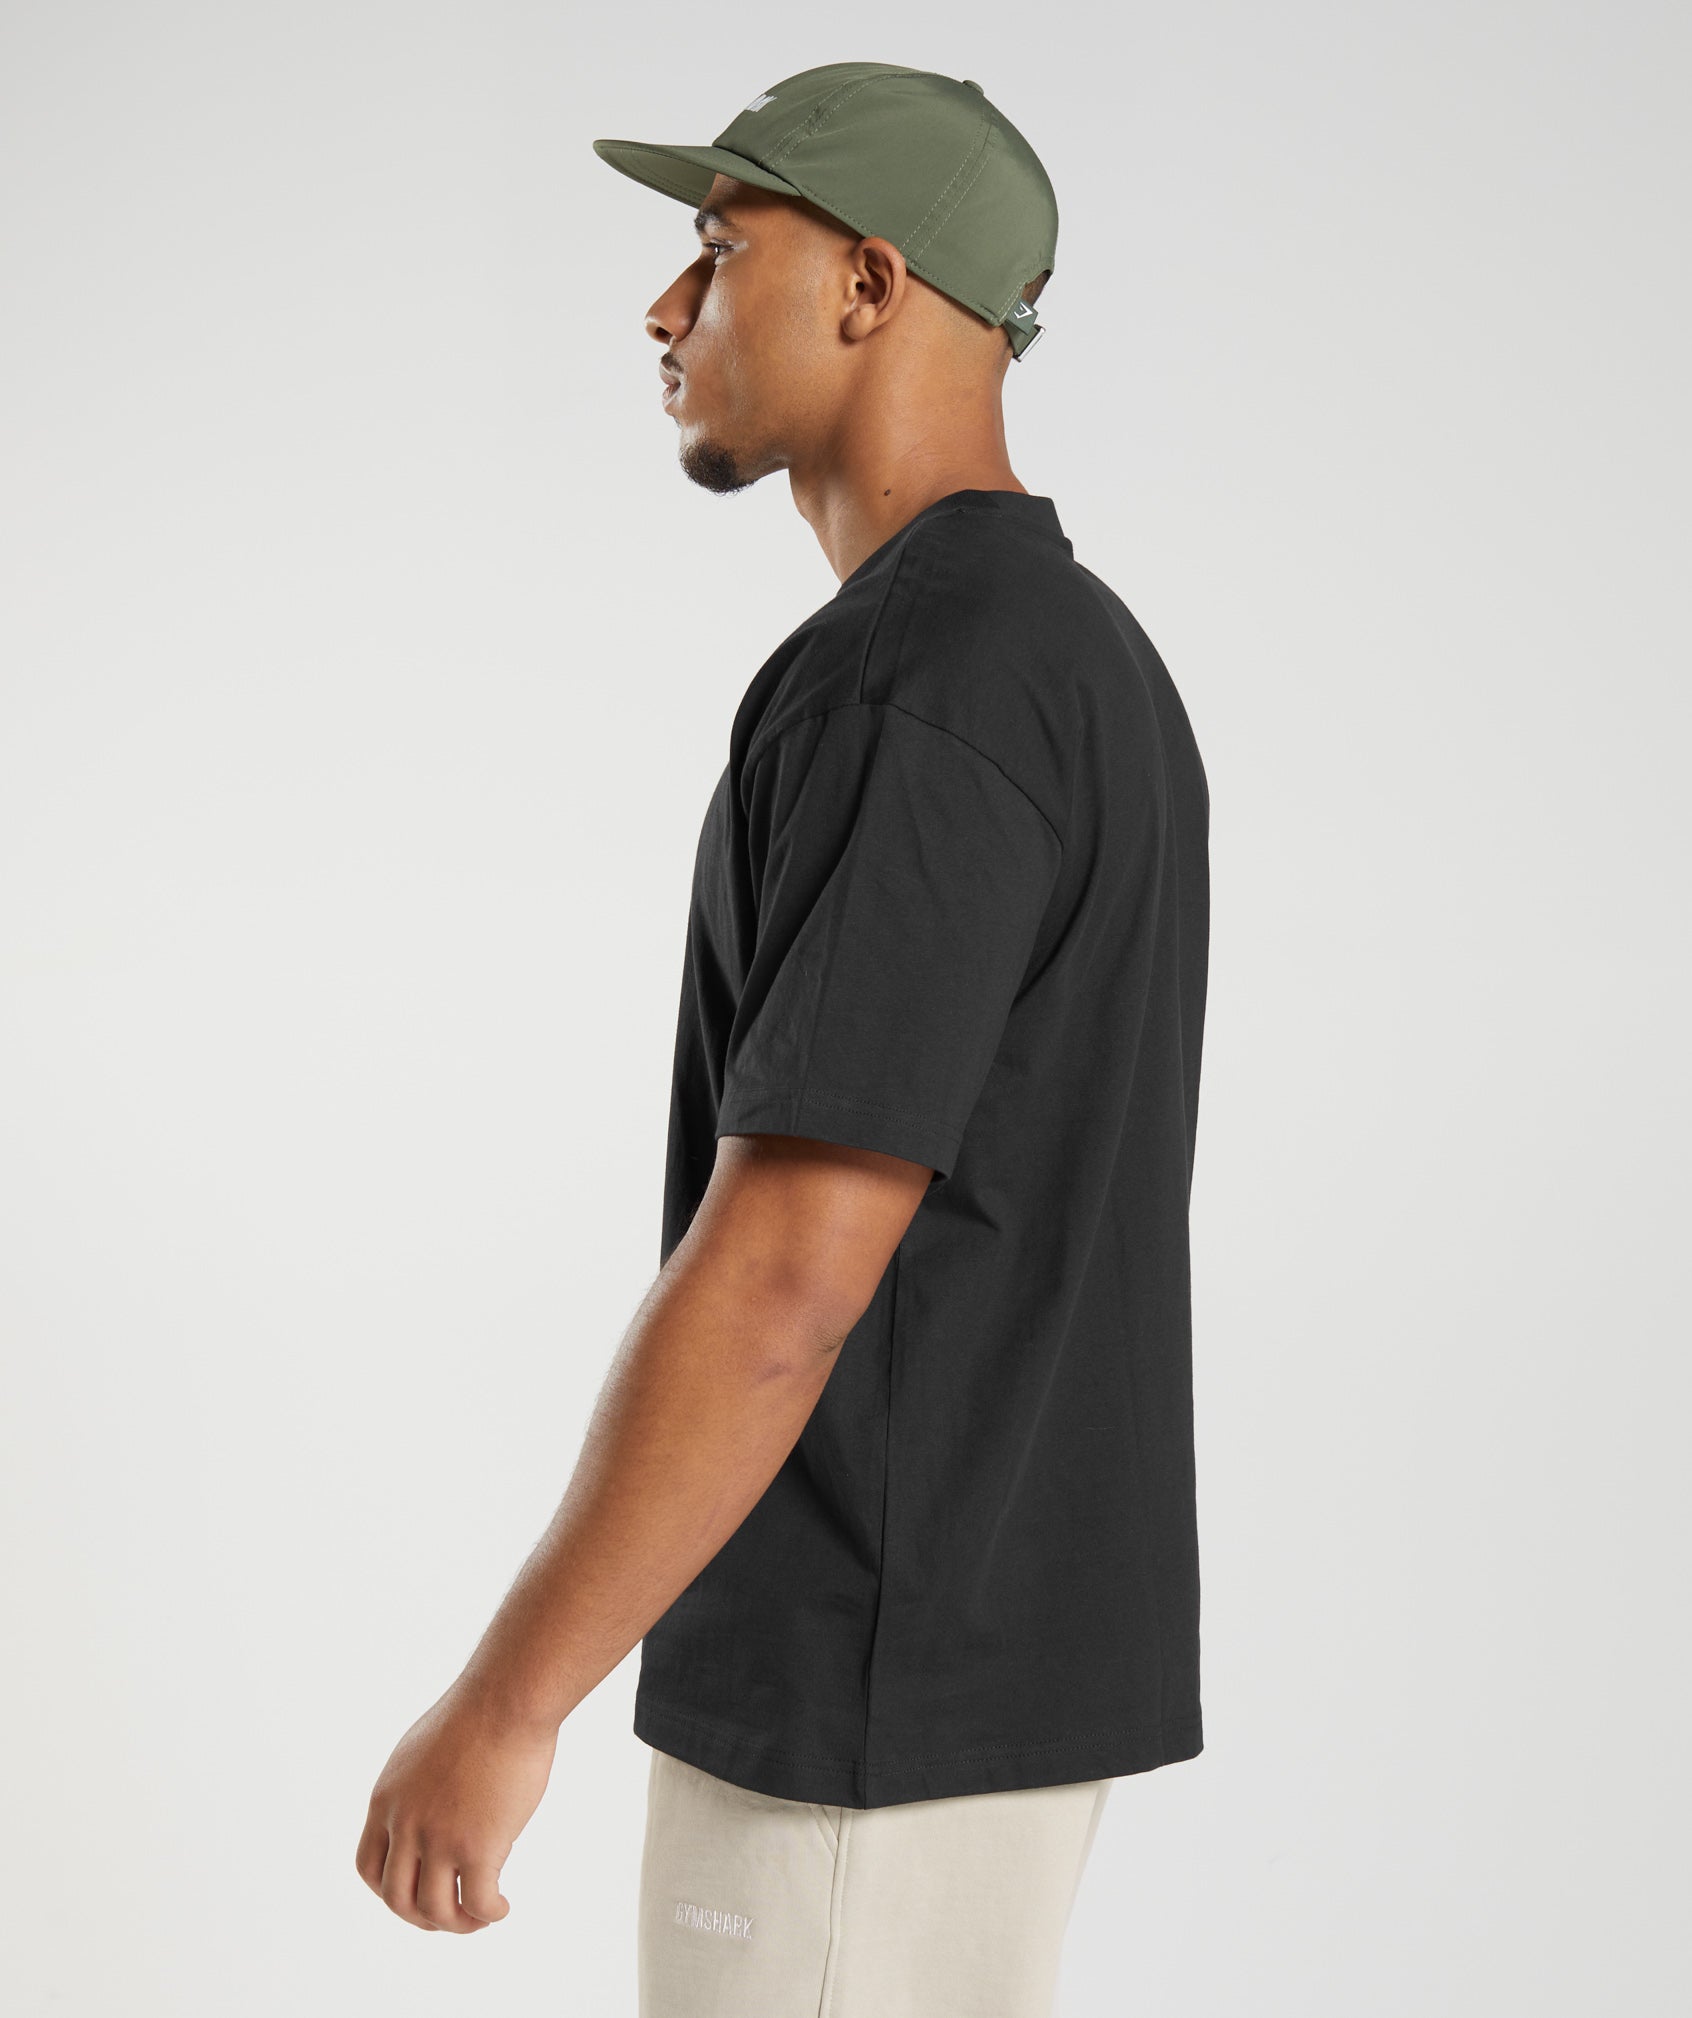 Rest Day Sweats T-Shirt in Black - view 4